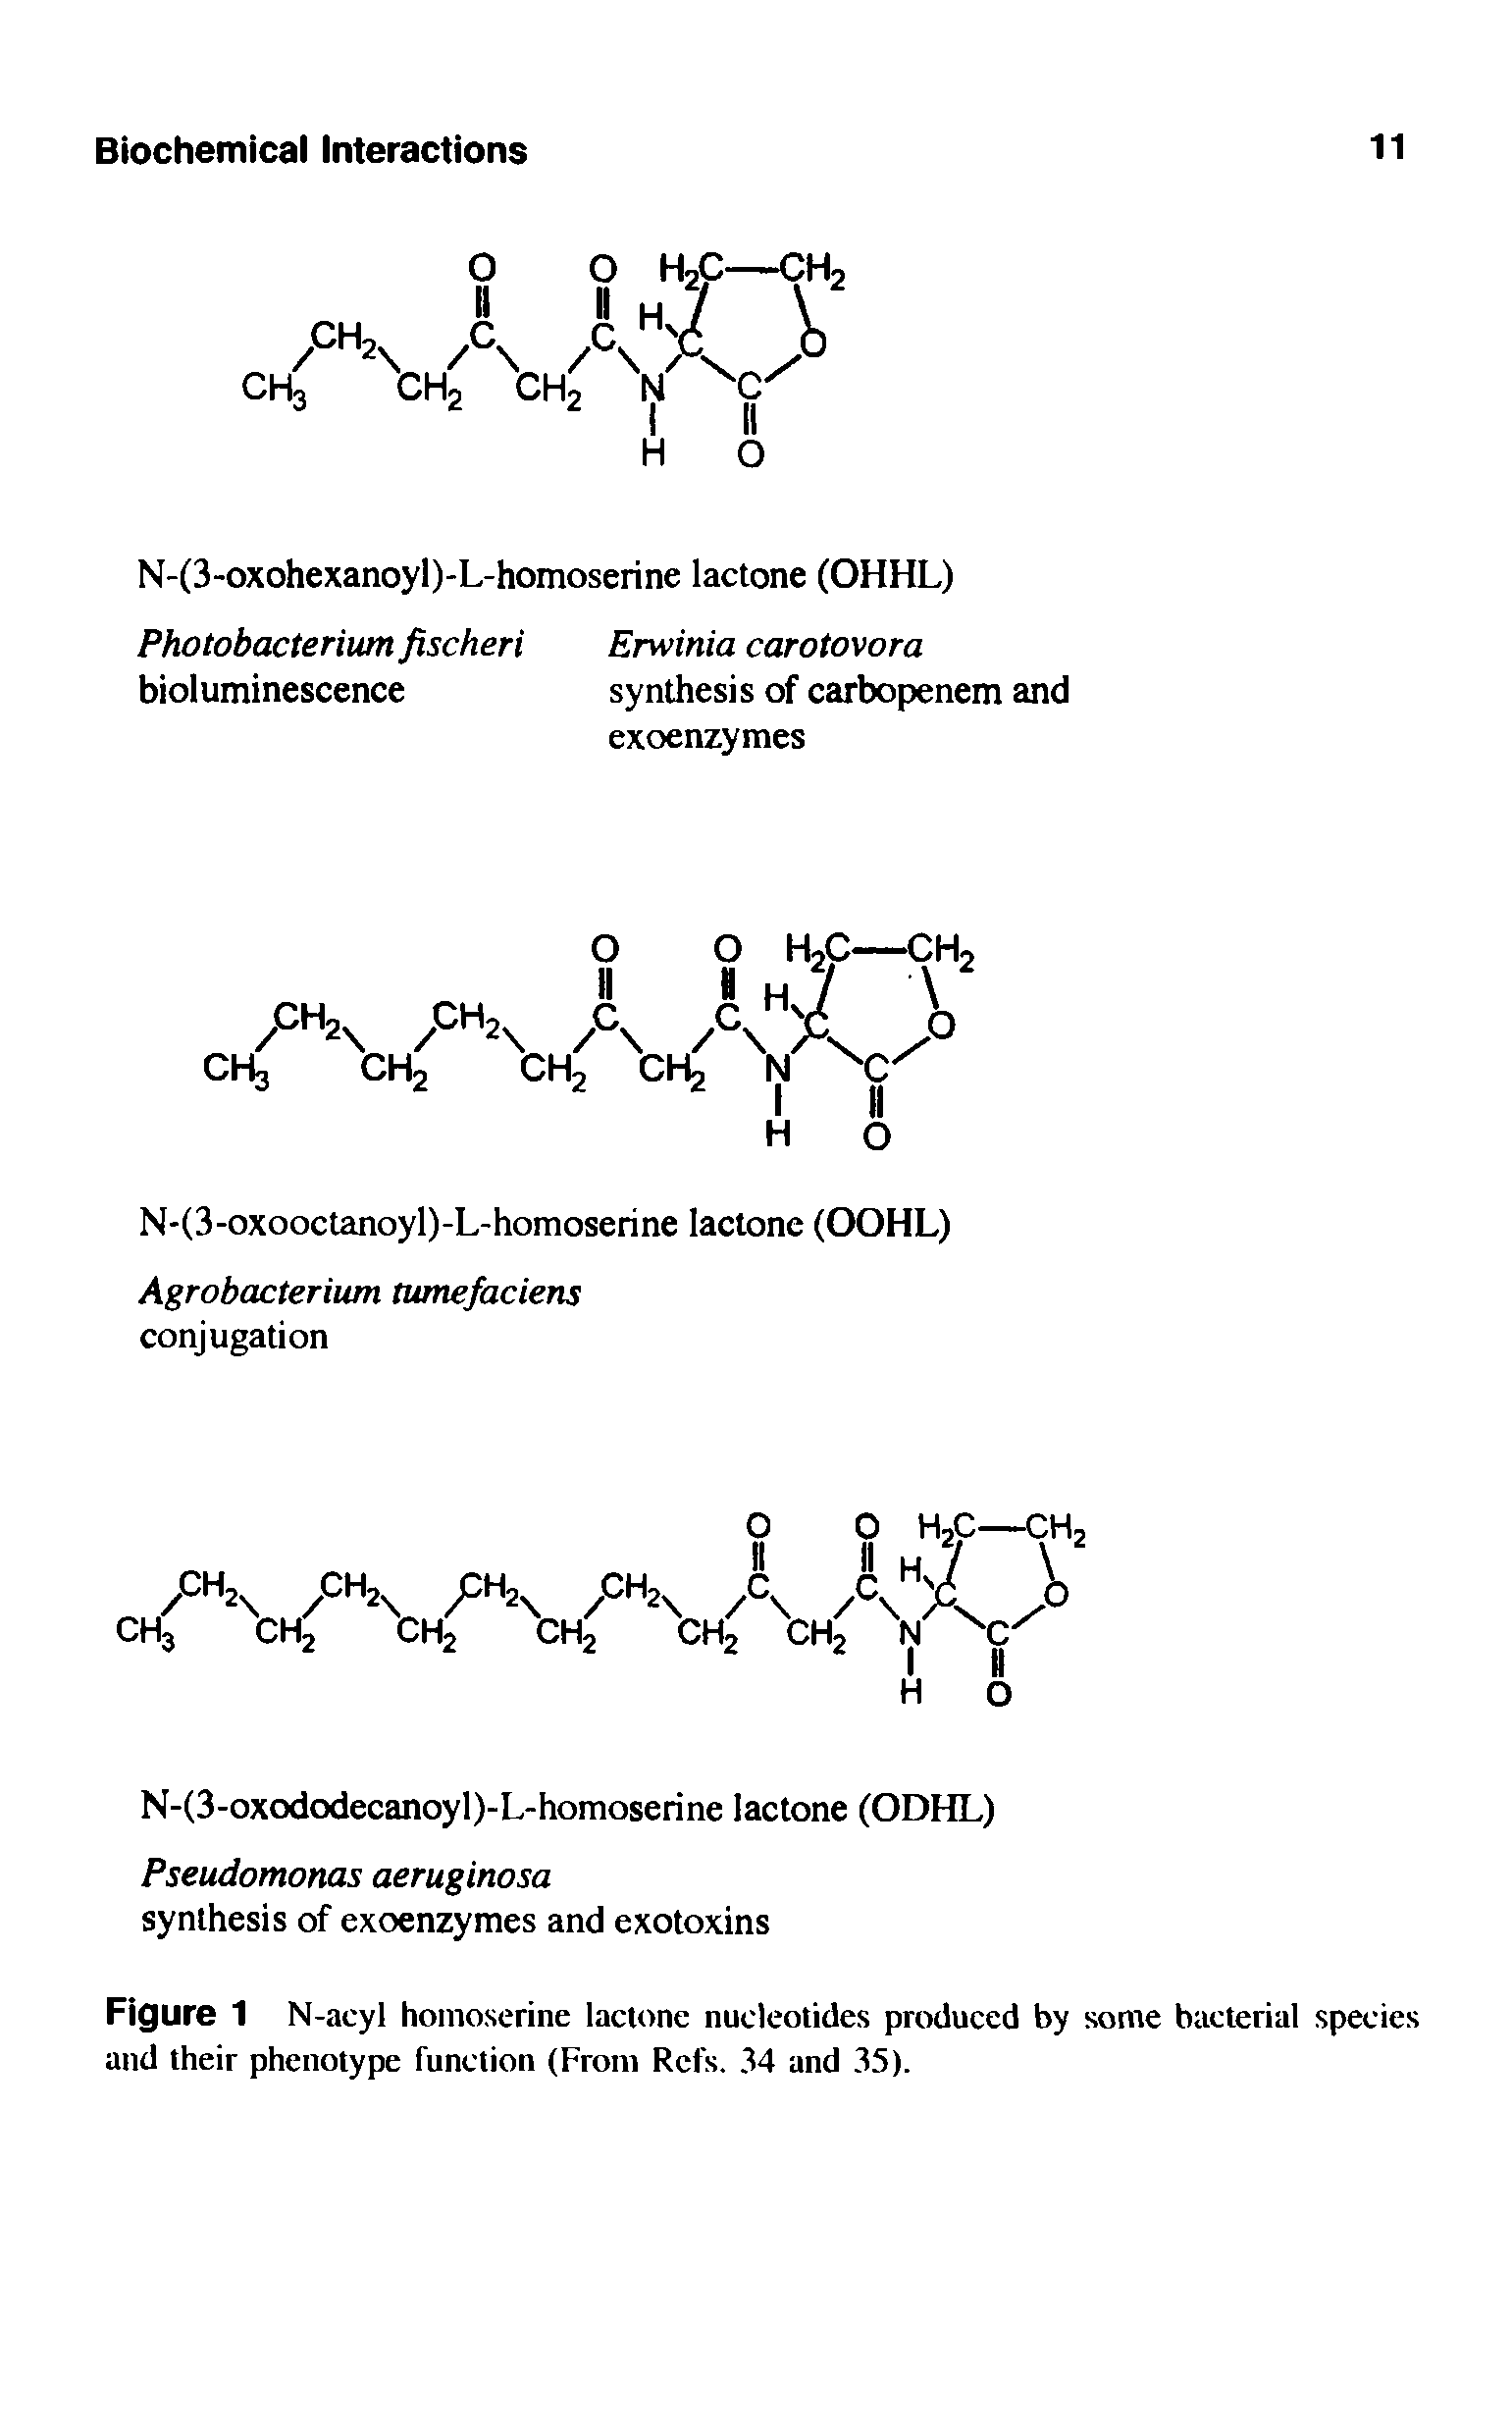 Figure 1 N-acyl homoserine lactone nucleotides produced by some bacterial species and their phenotype function (From Refs. 34 and 35).